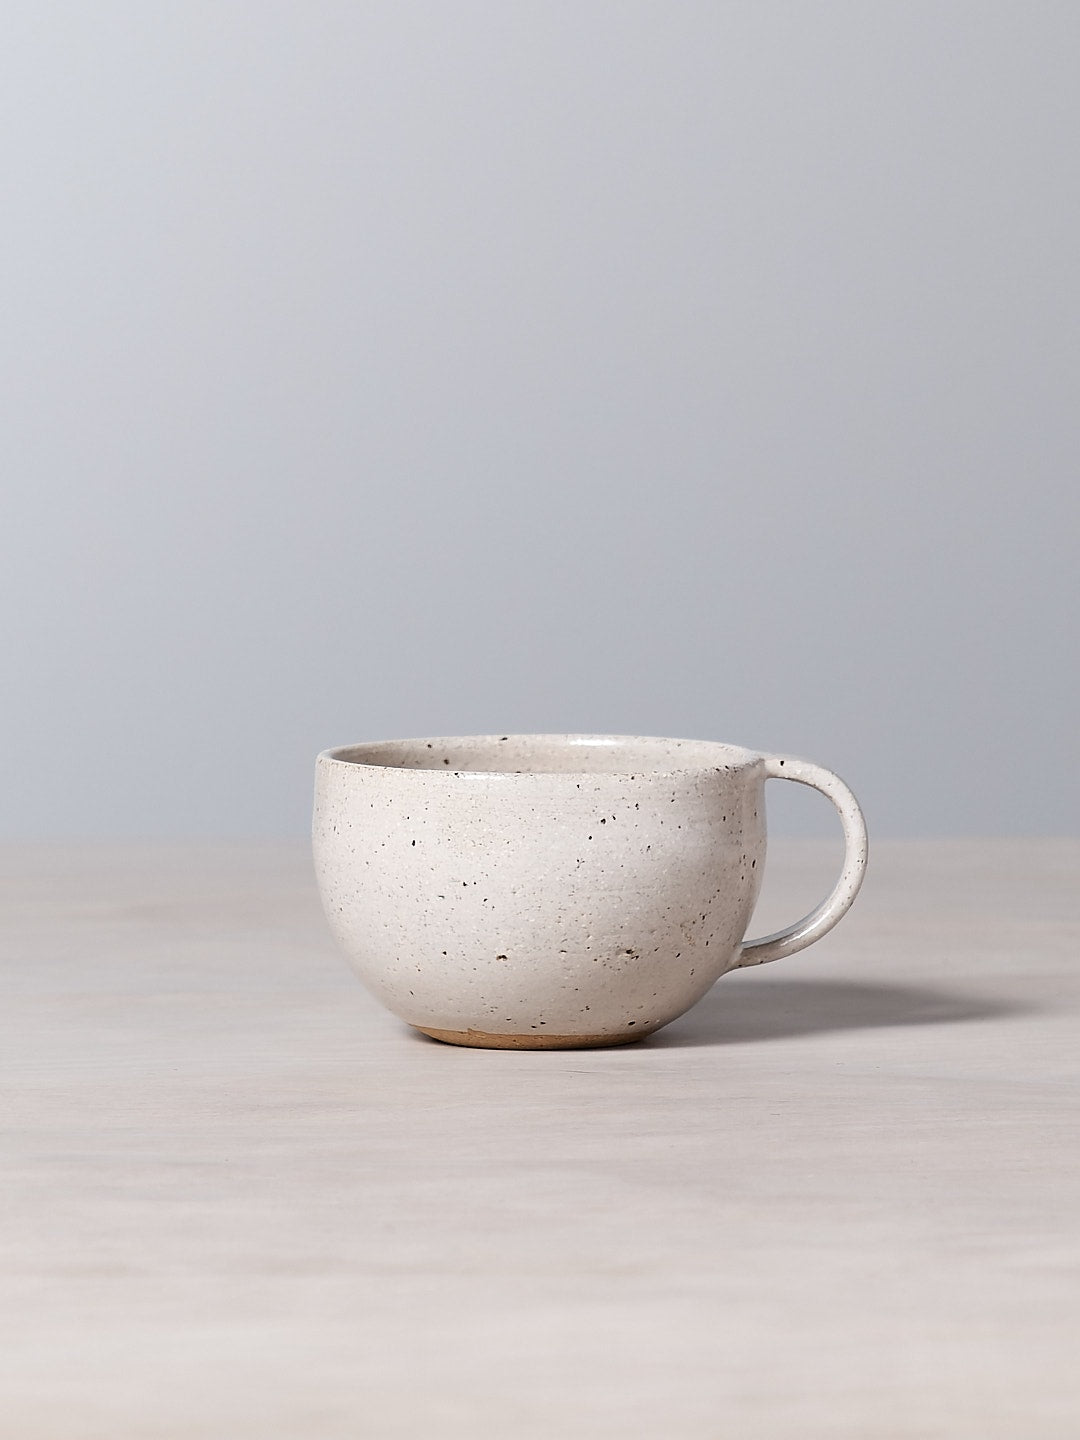 A handmade Speckled cup sitting on a table next to a gray wall. (Nicola Shuttleworth)